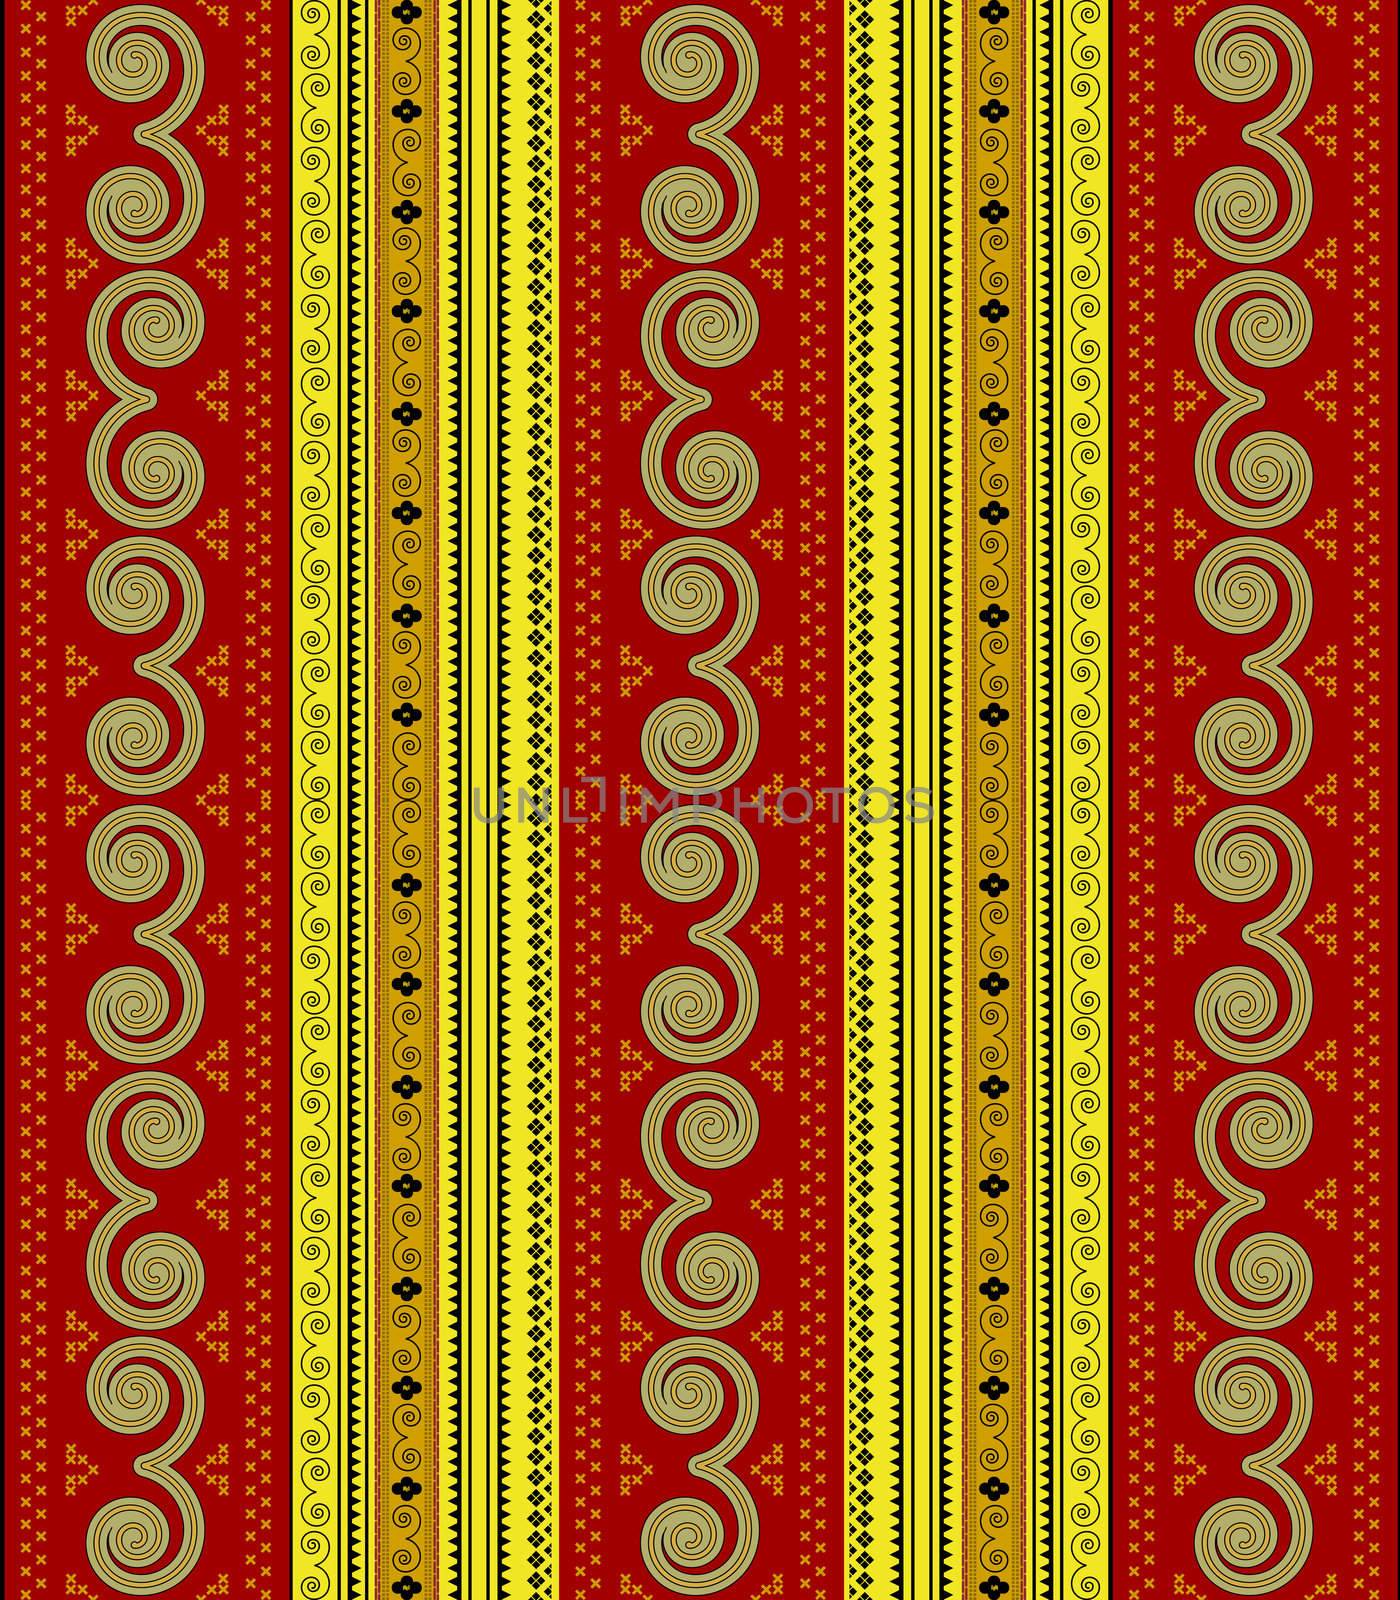 Traditional pattern with repeating geometric shapes